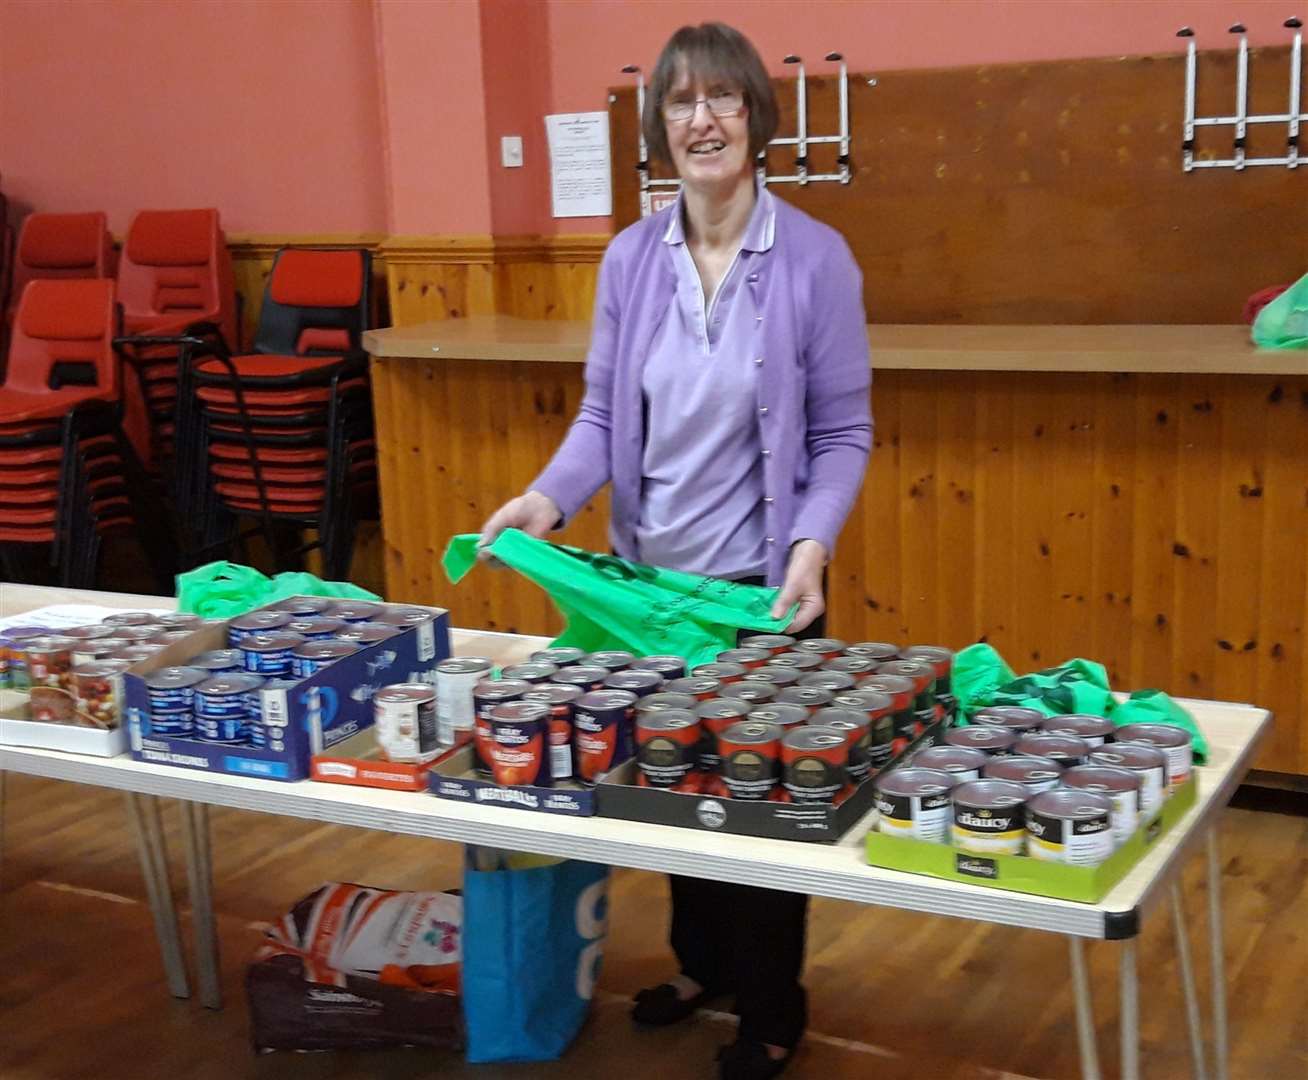 As service manager, Isobel ensured the smooth running of the care forum’s food waste initiative and its befriending and foot care services.